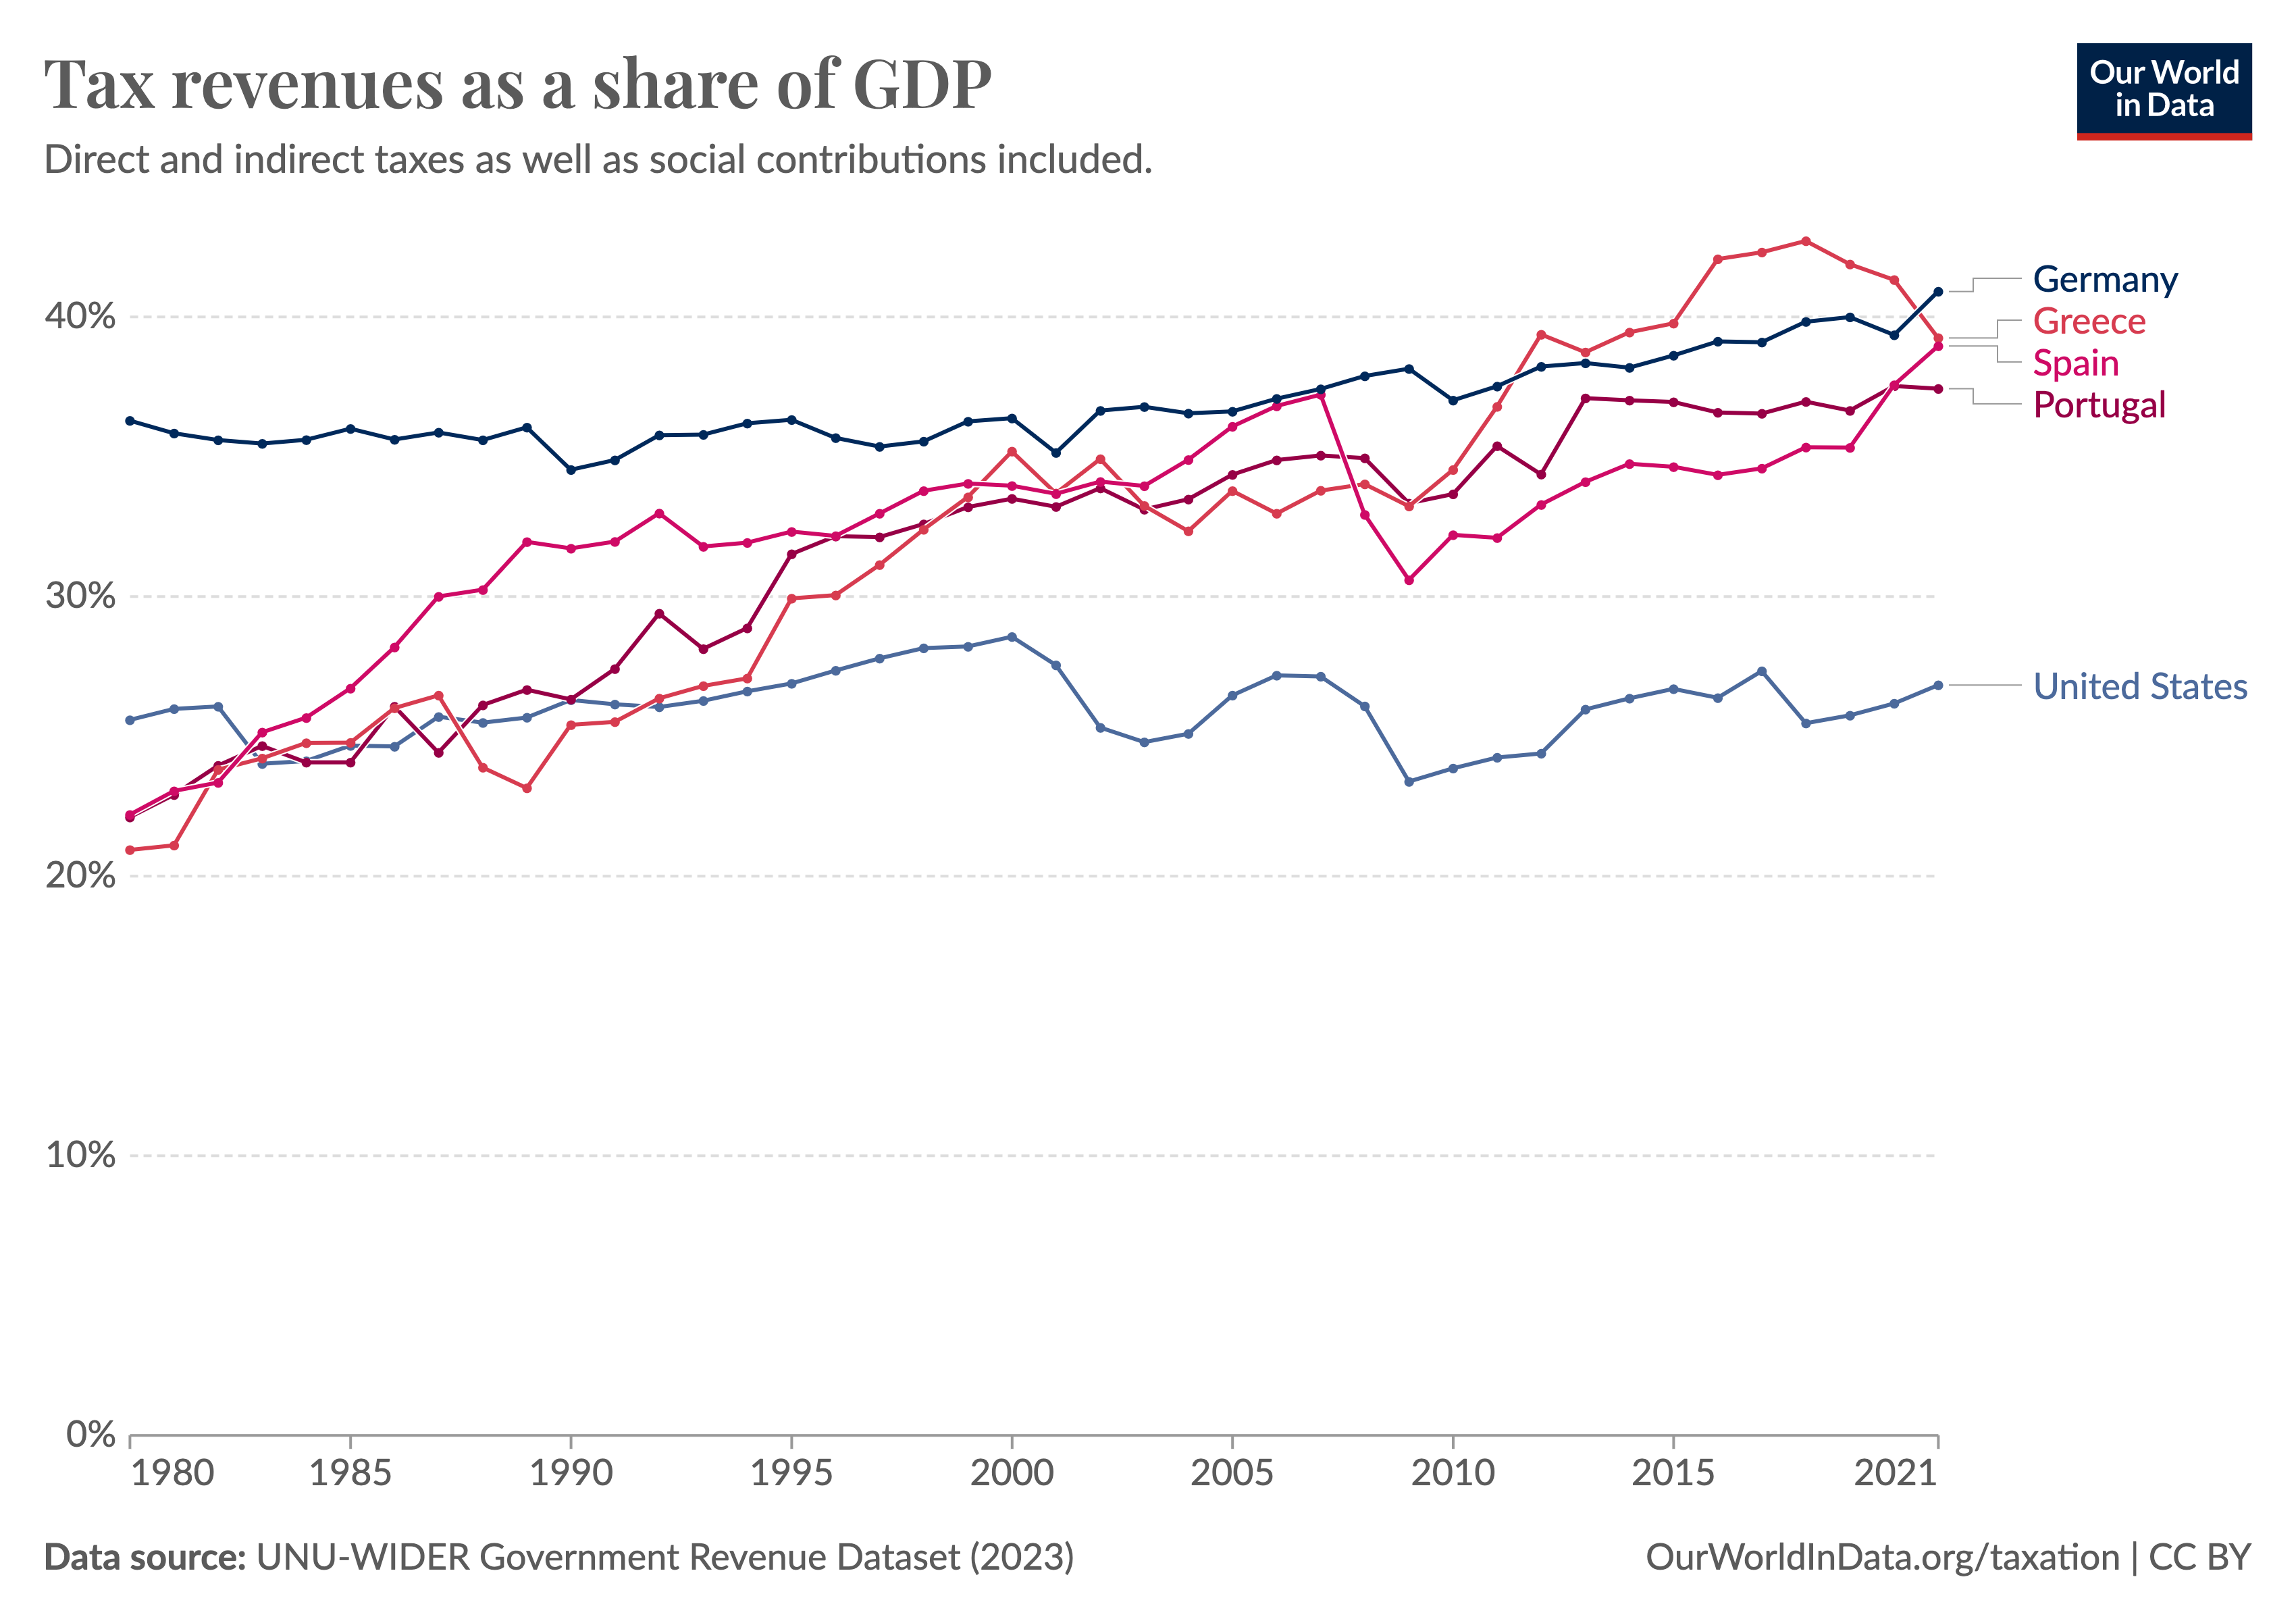 Line chart showing that the Southern European countries Greece, Spain, and Portugal have increased their tax revenues over the past decades, and while they were previously closer to the United States, now are close to Germany.